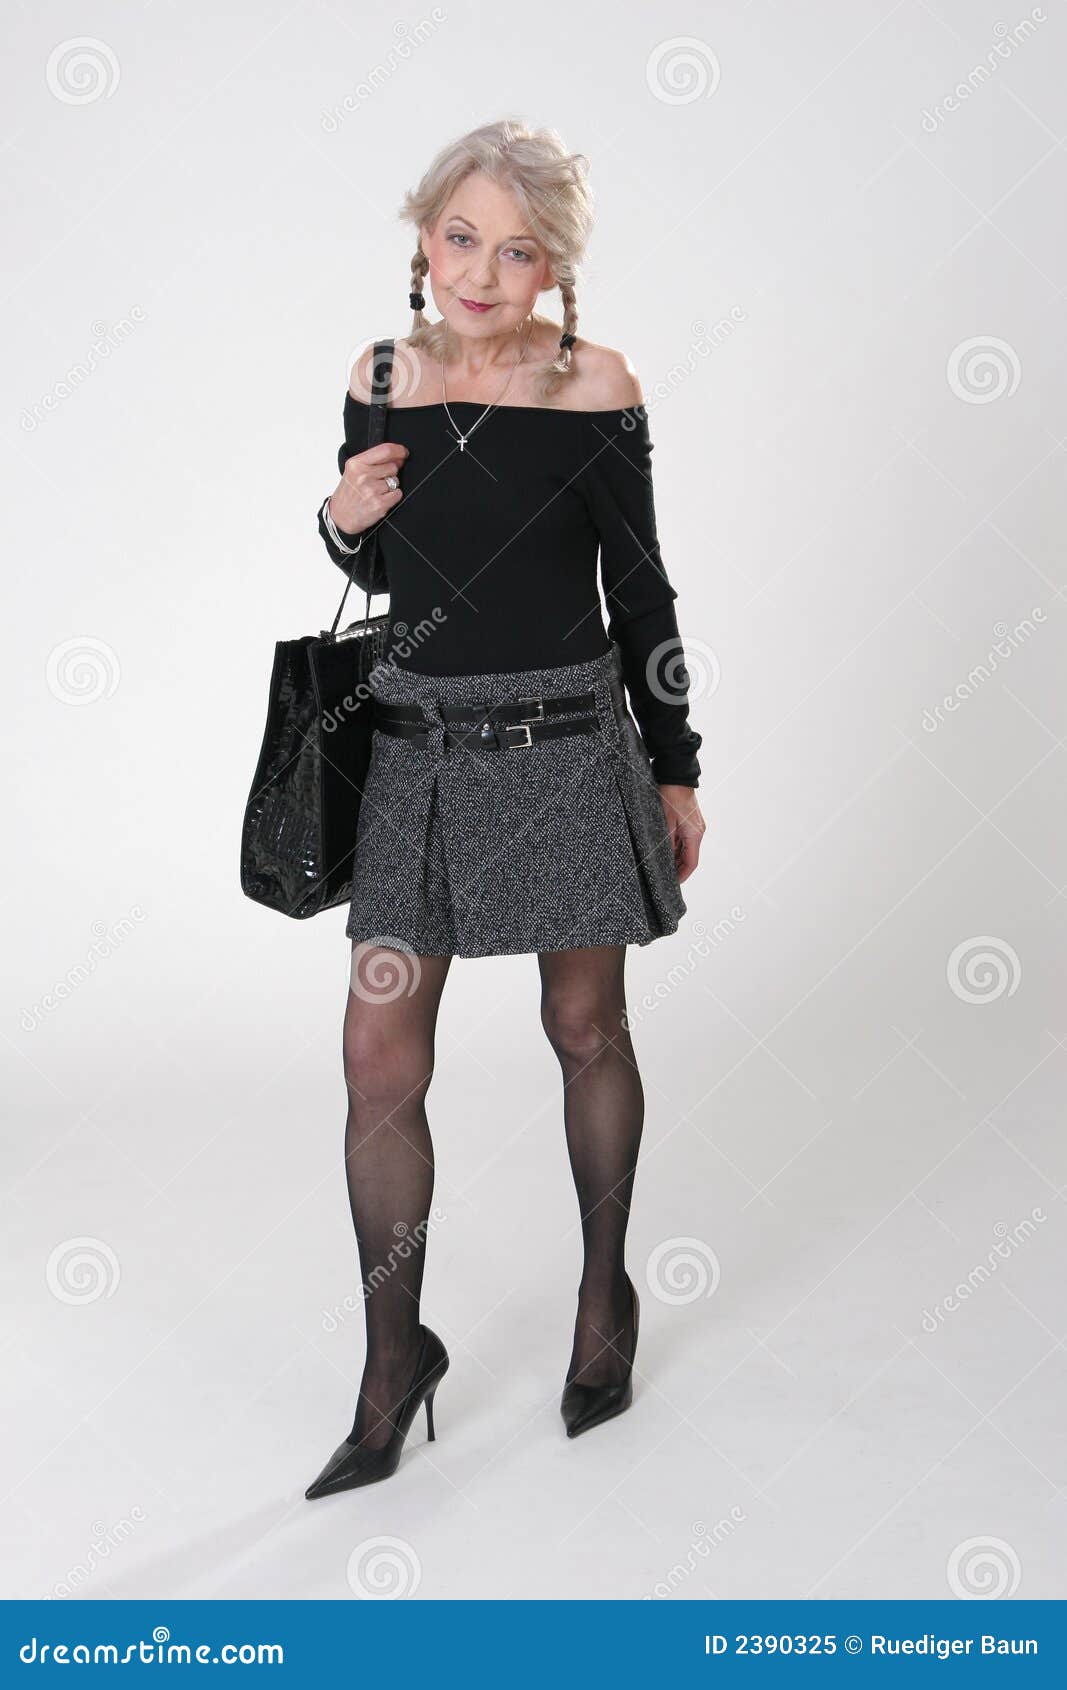 Mature mini skirt pictures Mature Mini Skirt Woman Photos Free Royalty Free Stock Photos From Dreamstime